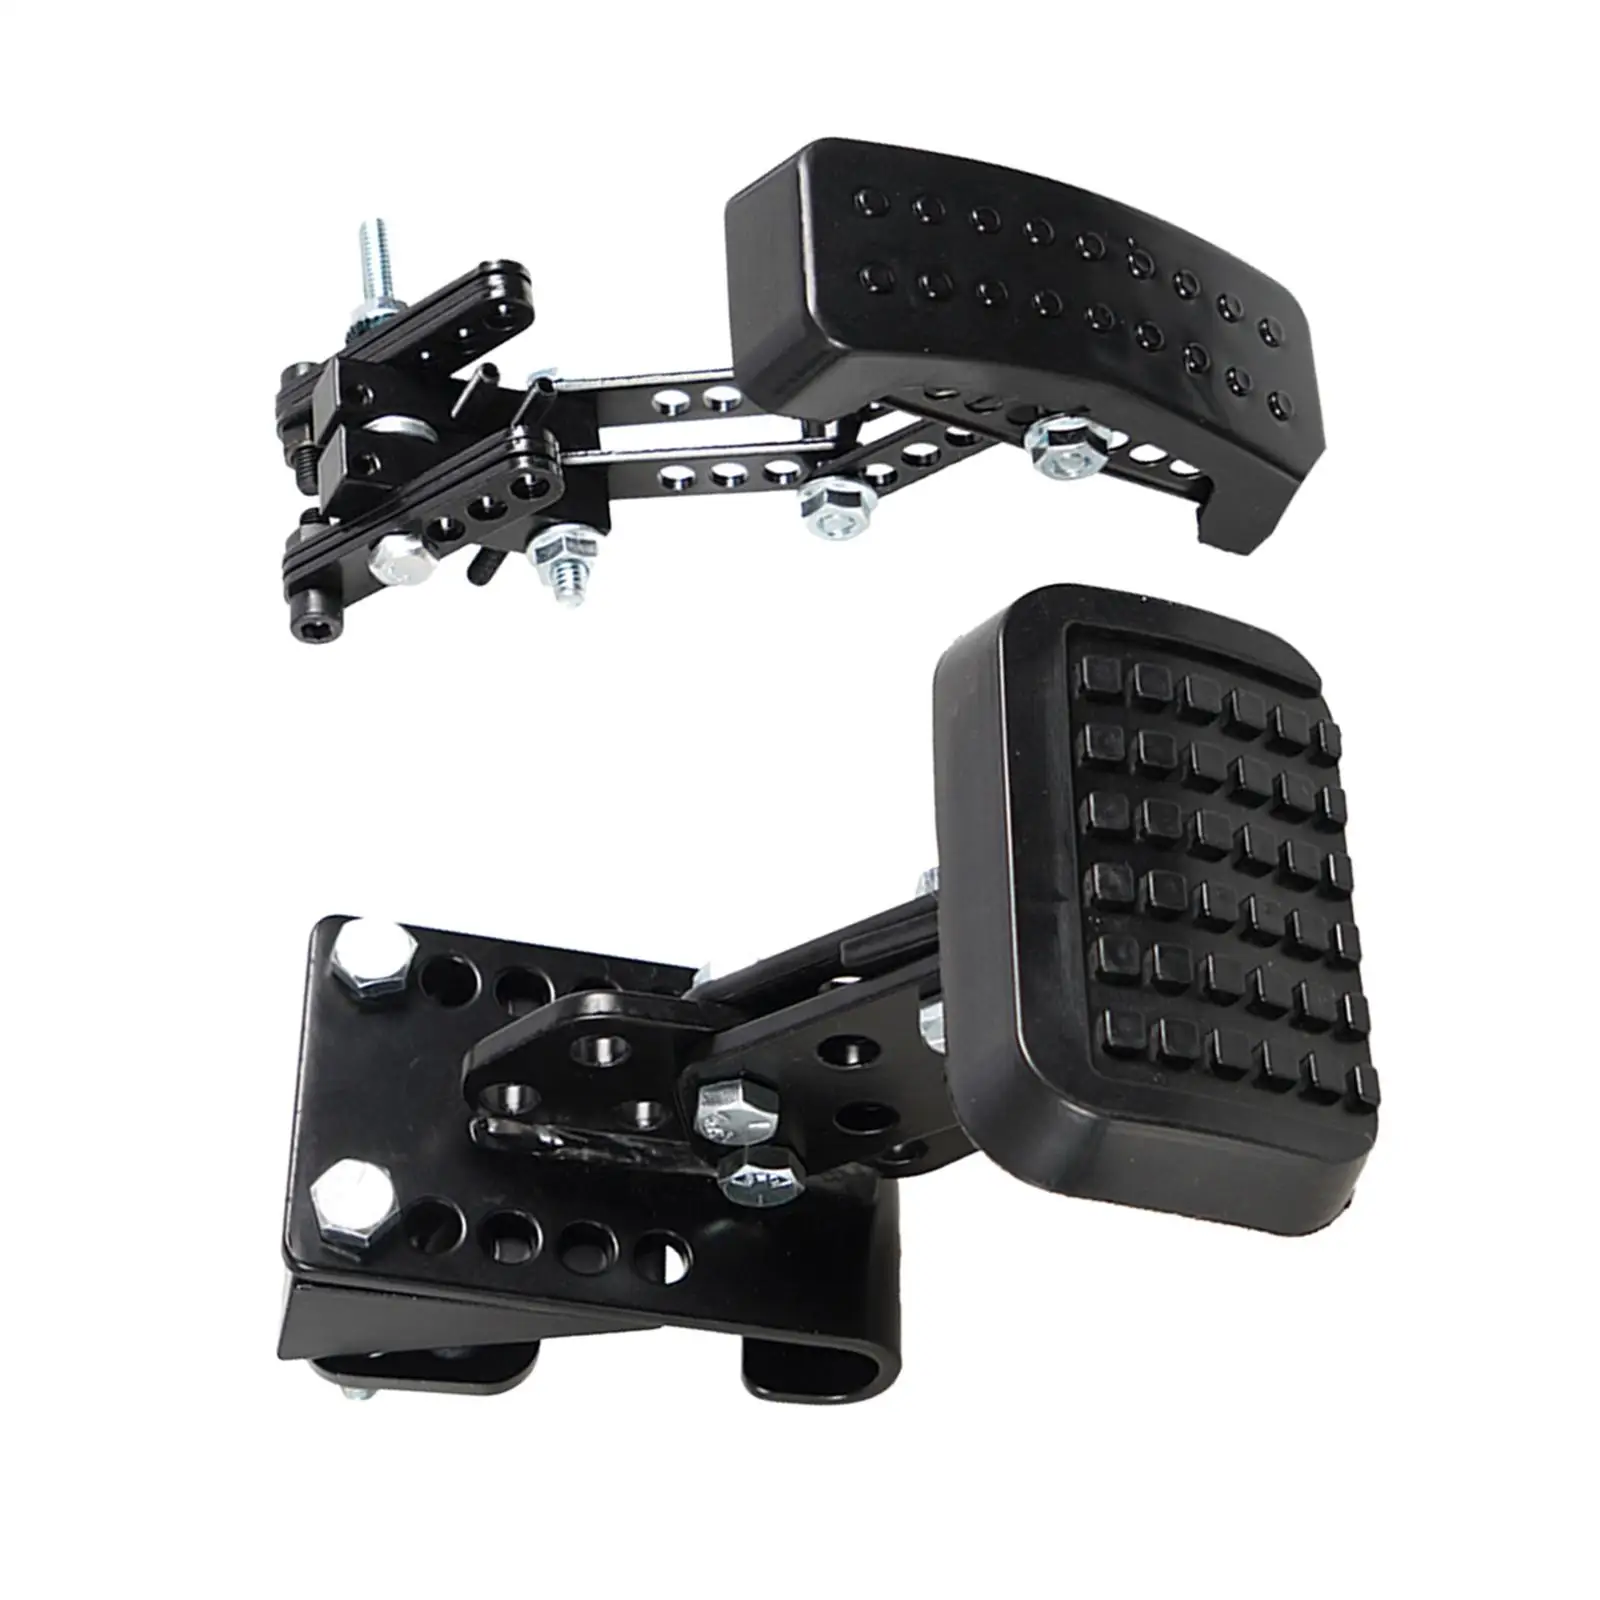 Universal Car Brake Pedal Extender Pedal Extension Enlarge car Anti Slip Pedal for Parts Vehicle Accessories Replaces